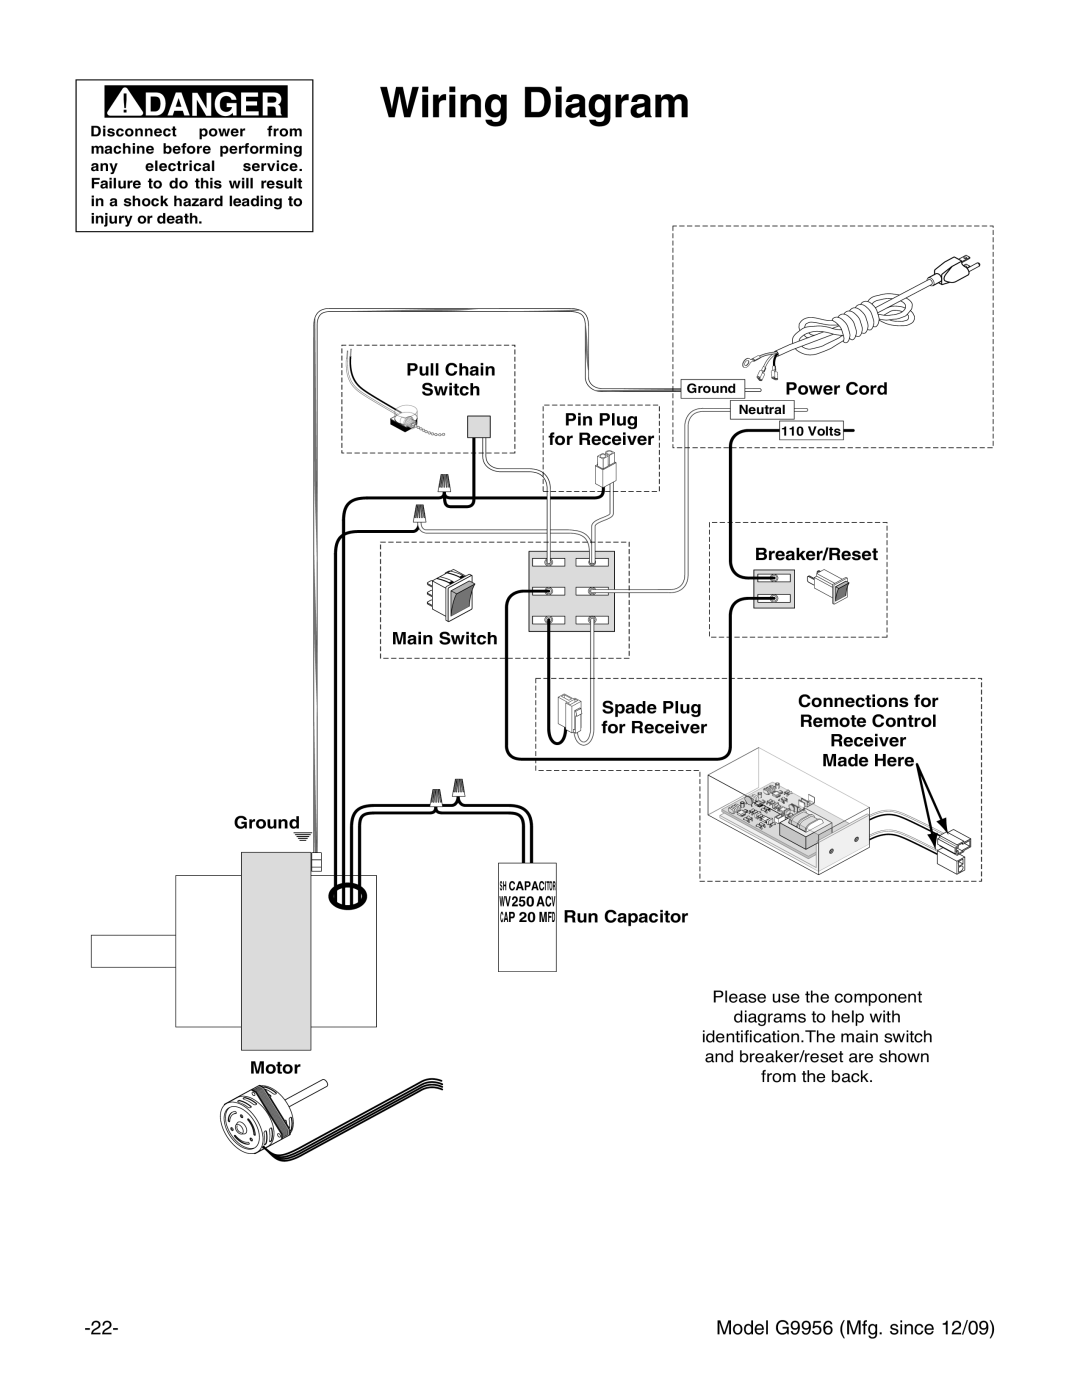 Grizzly G9956 instruction manual Wiring Diagram 